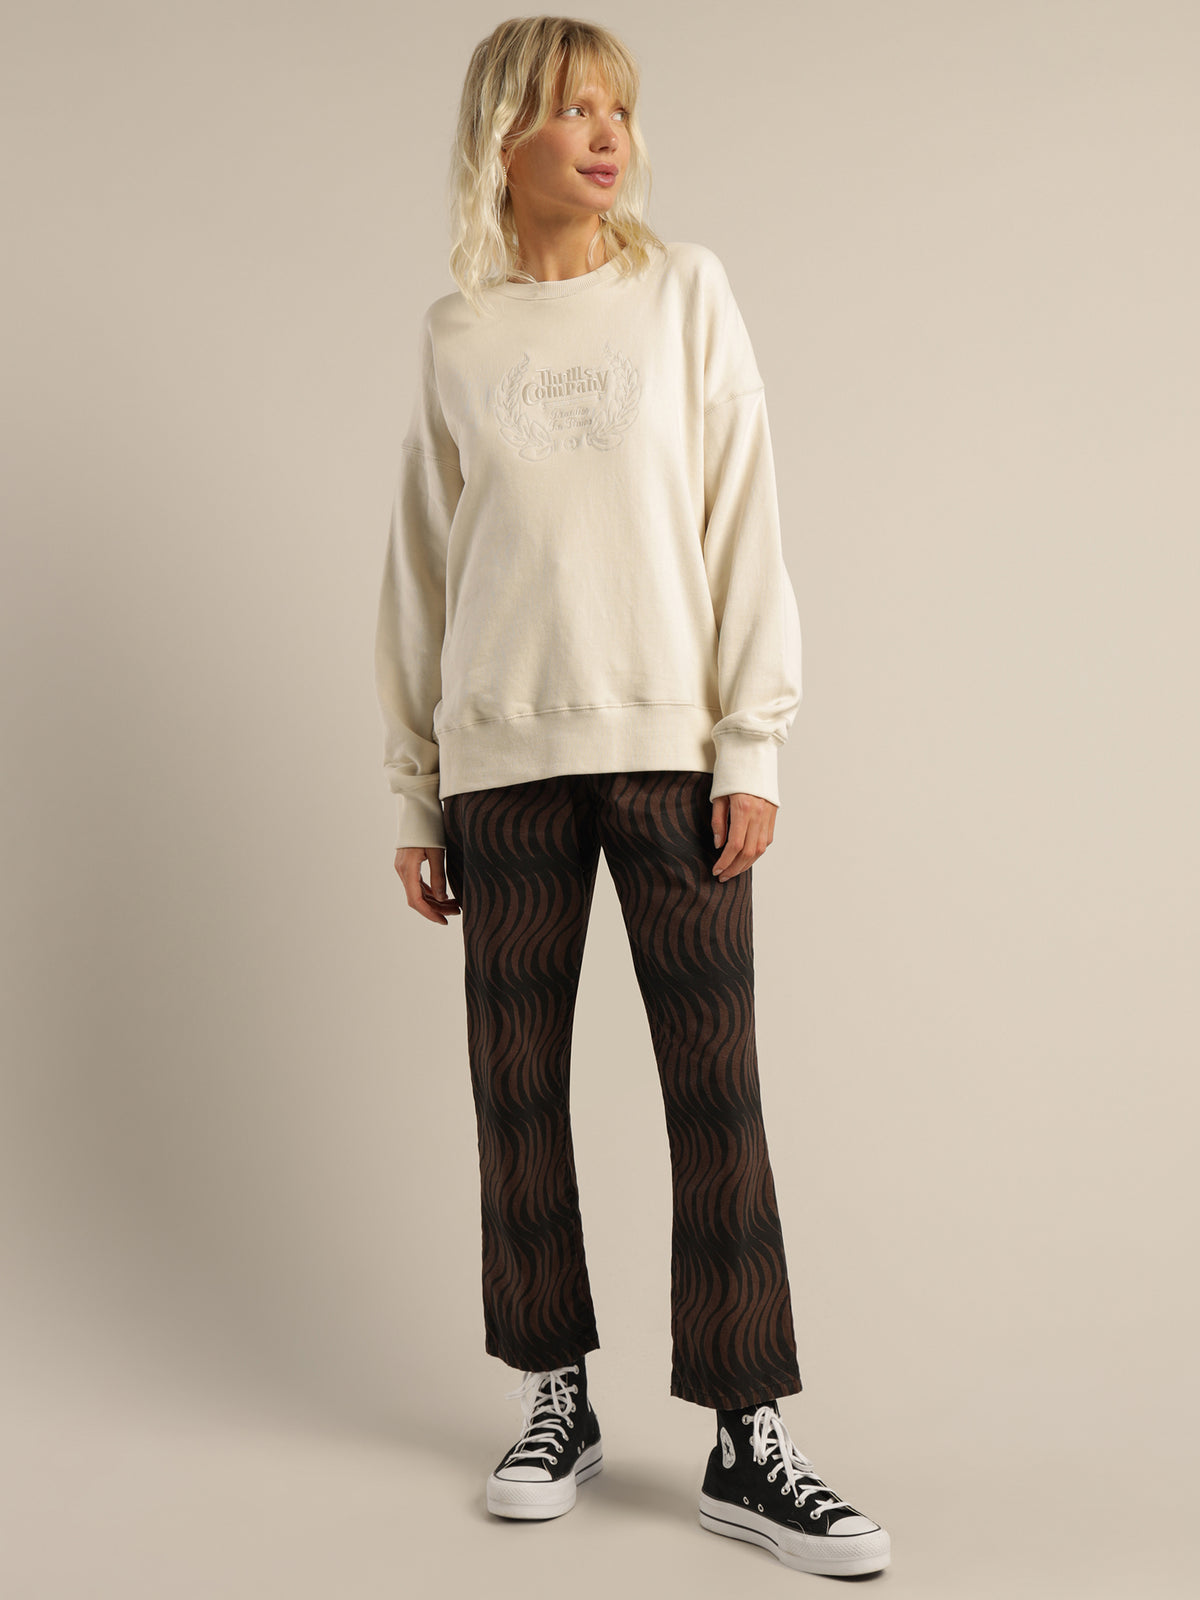 Paradise Crest Slouch Crew in Unbleached